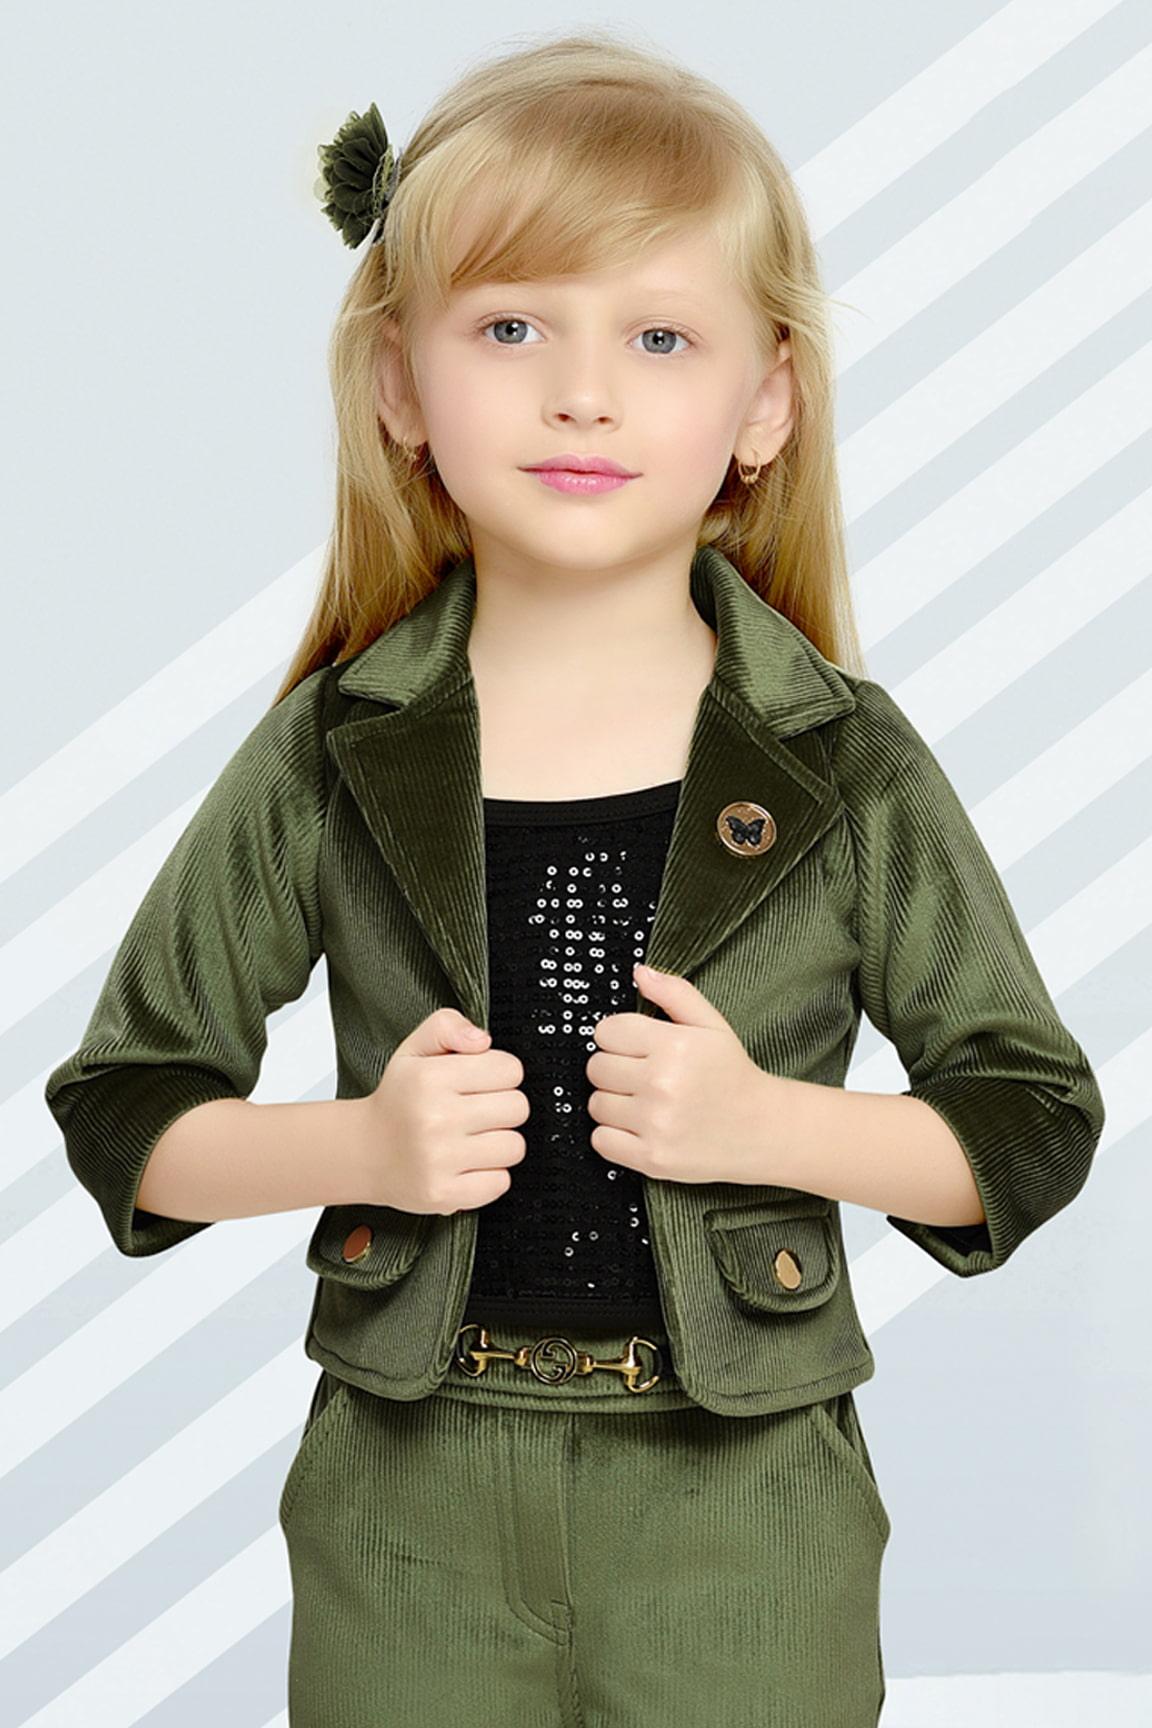 Classic Olive Green Jacket And Pant Set For Girls - Lagorii Kids